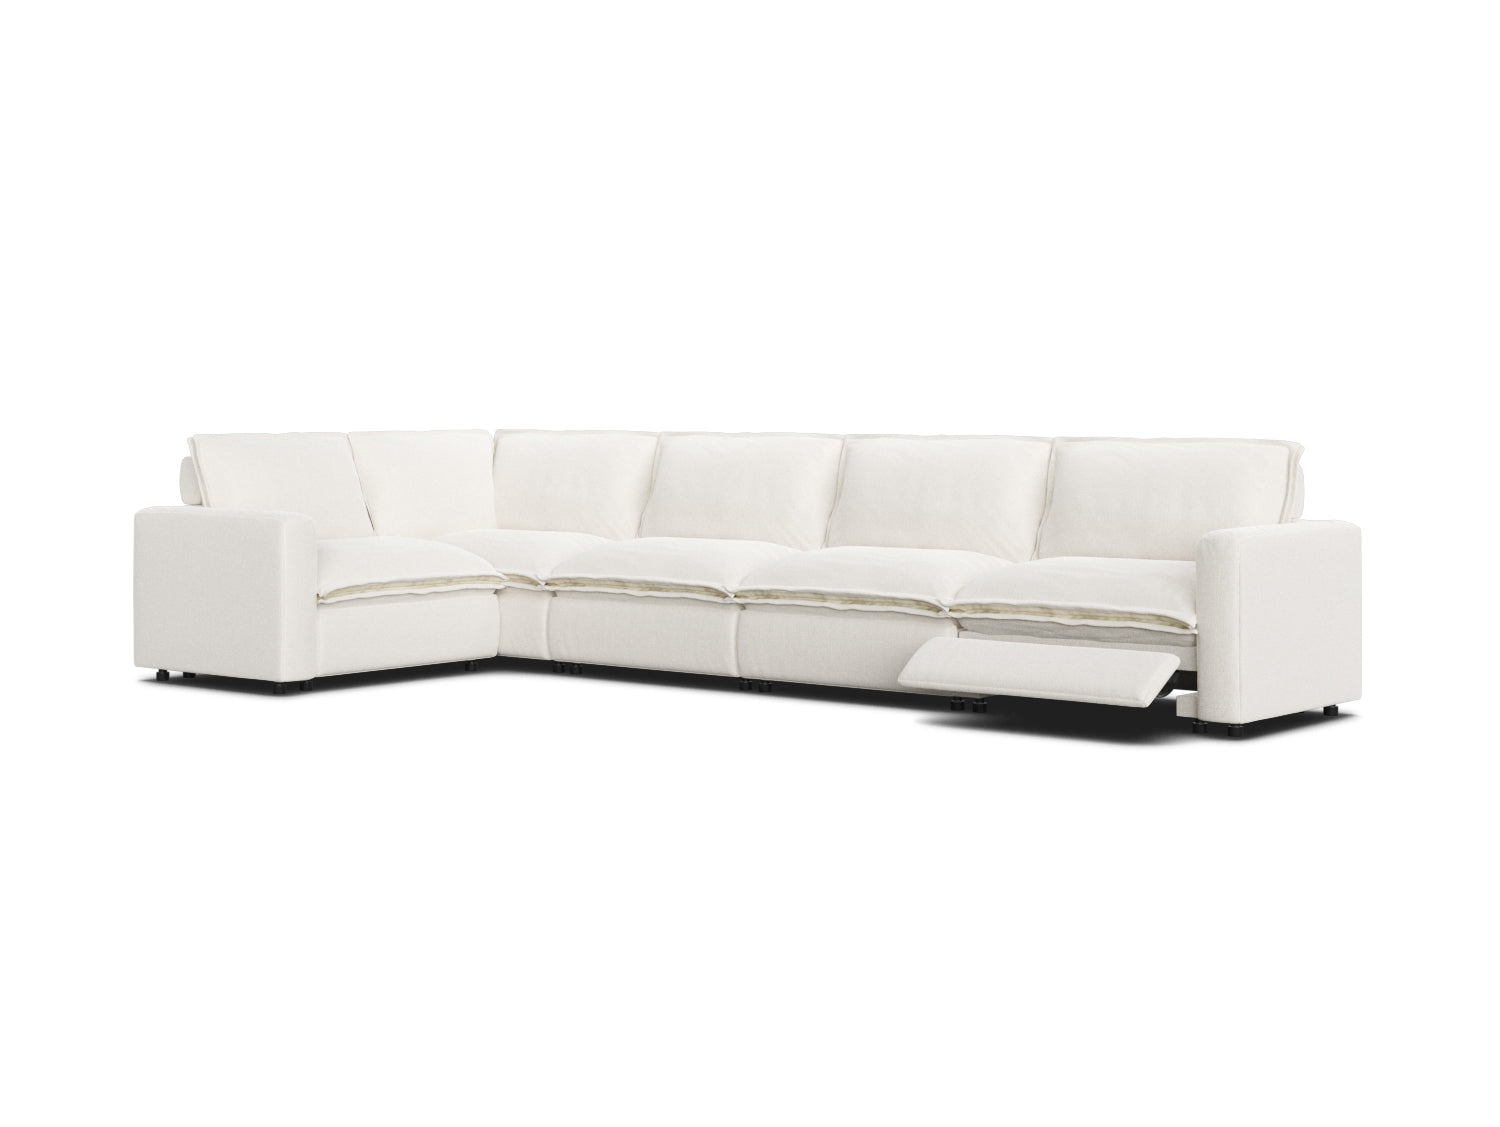 Reclining modular 5 seat sectional in white linen